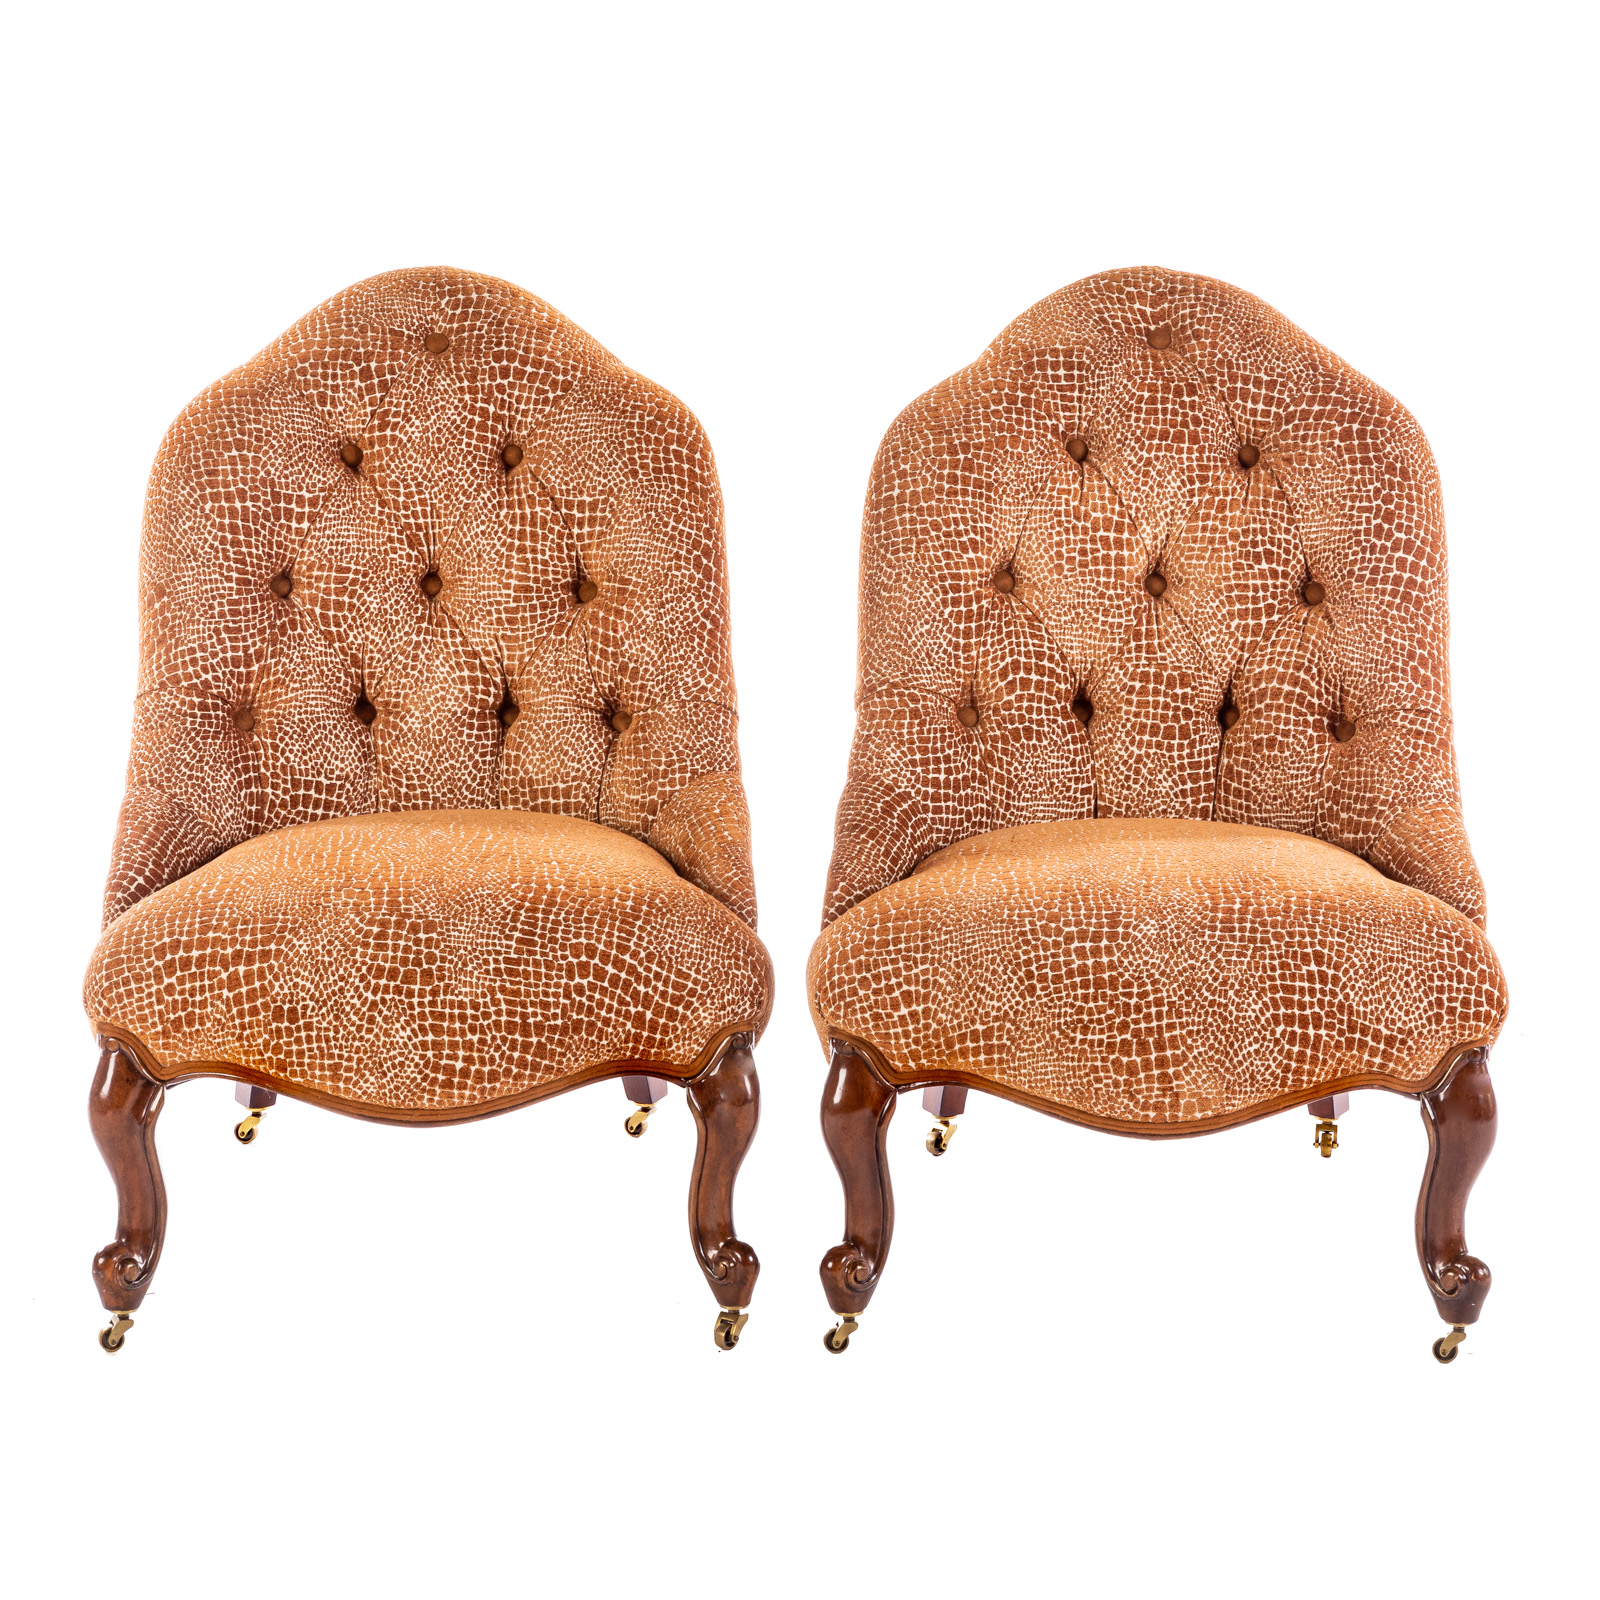 A PAIR OF VICTORIAN STYLE UPHOLSTERED 29e912